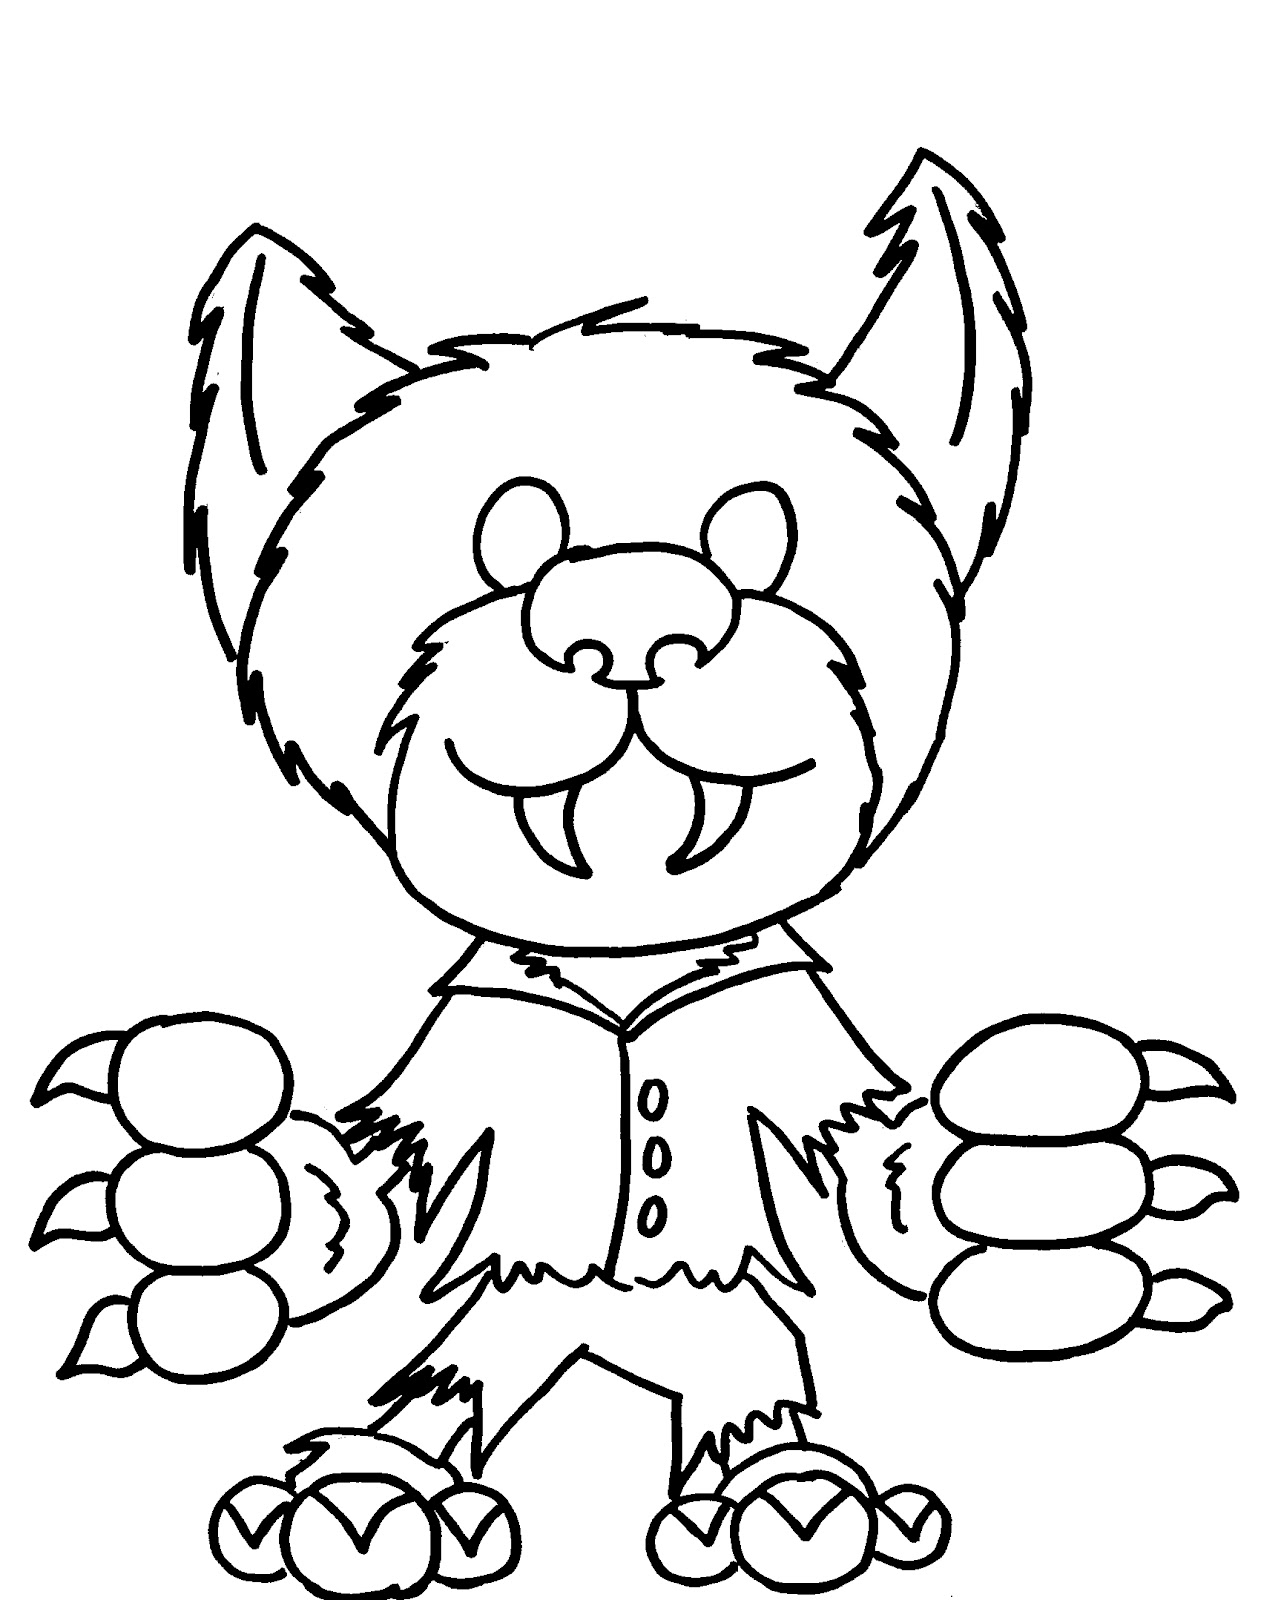 Cute Werewolf Coloring - Play Free Coloring Game Online